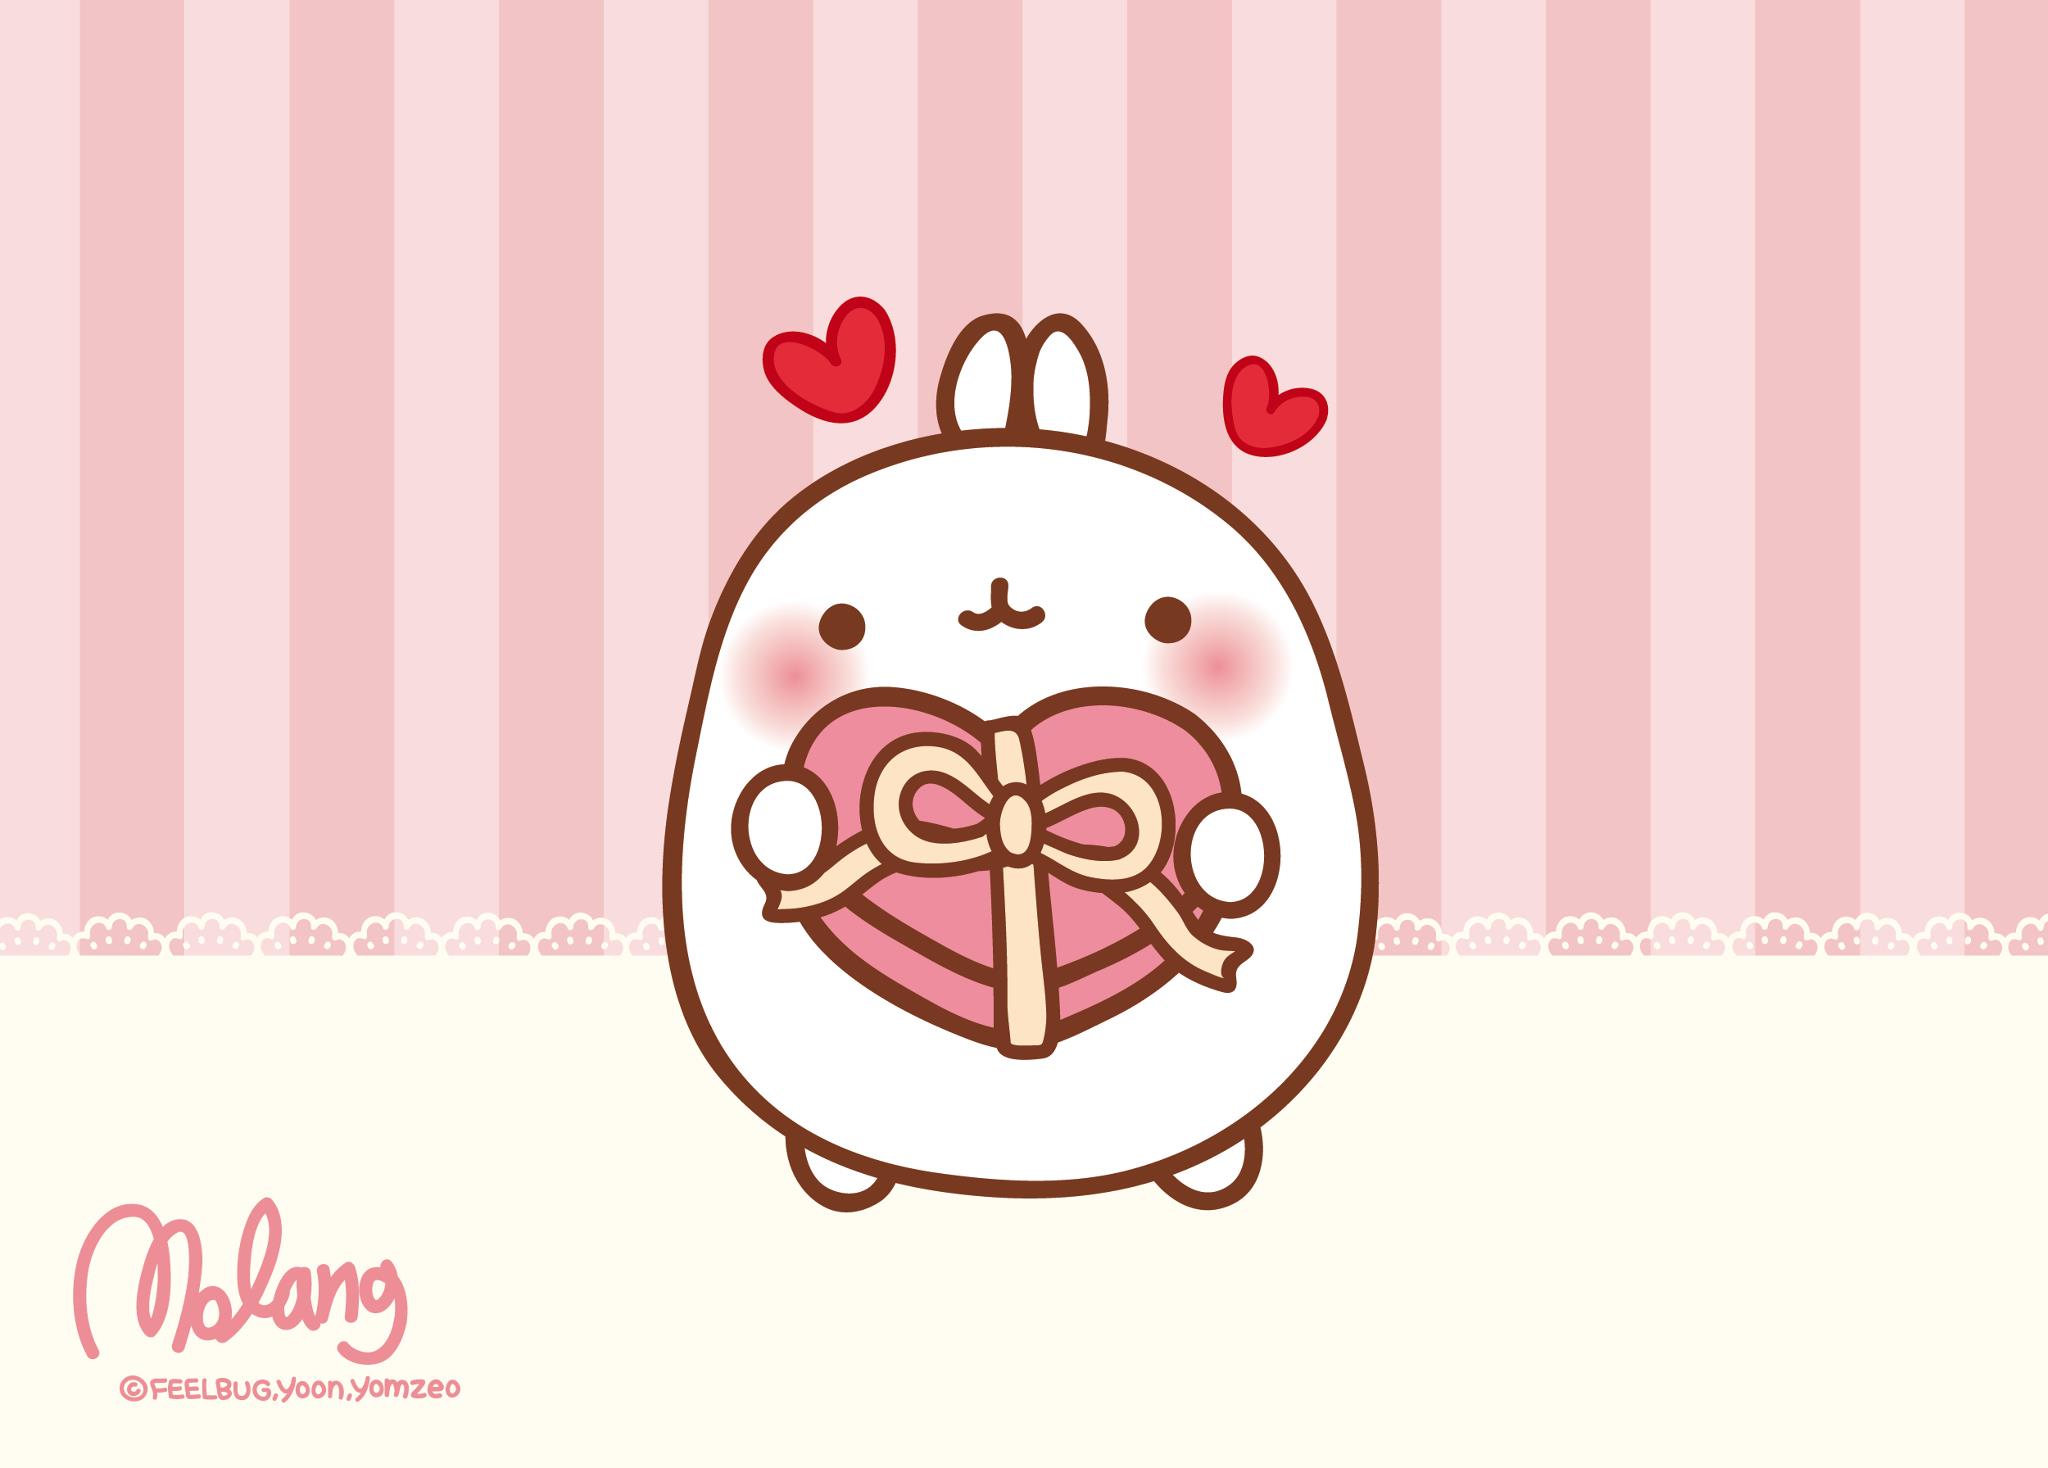 Nice Images Collection: Molang Desktop Wallpapers